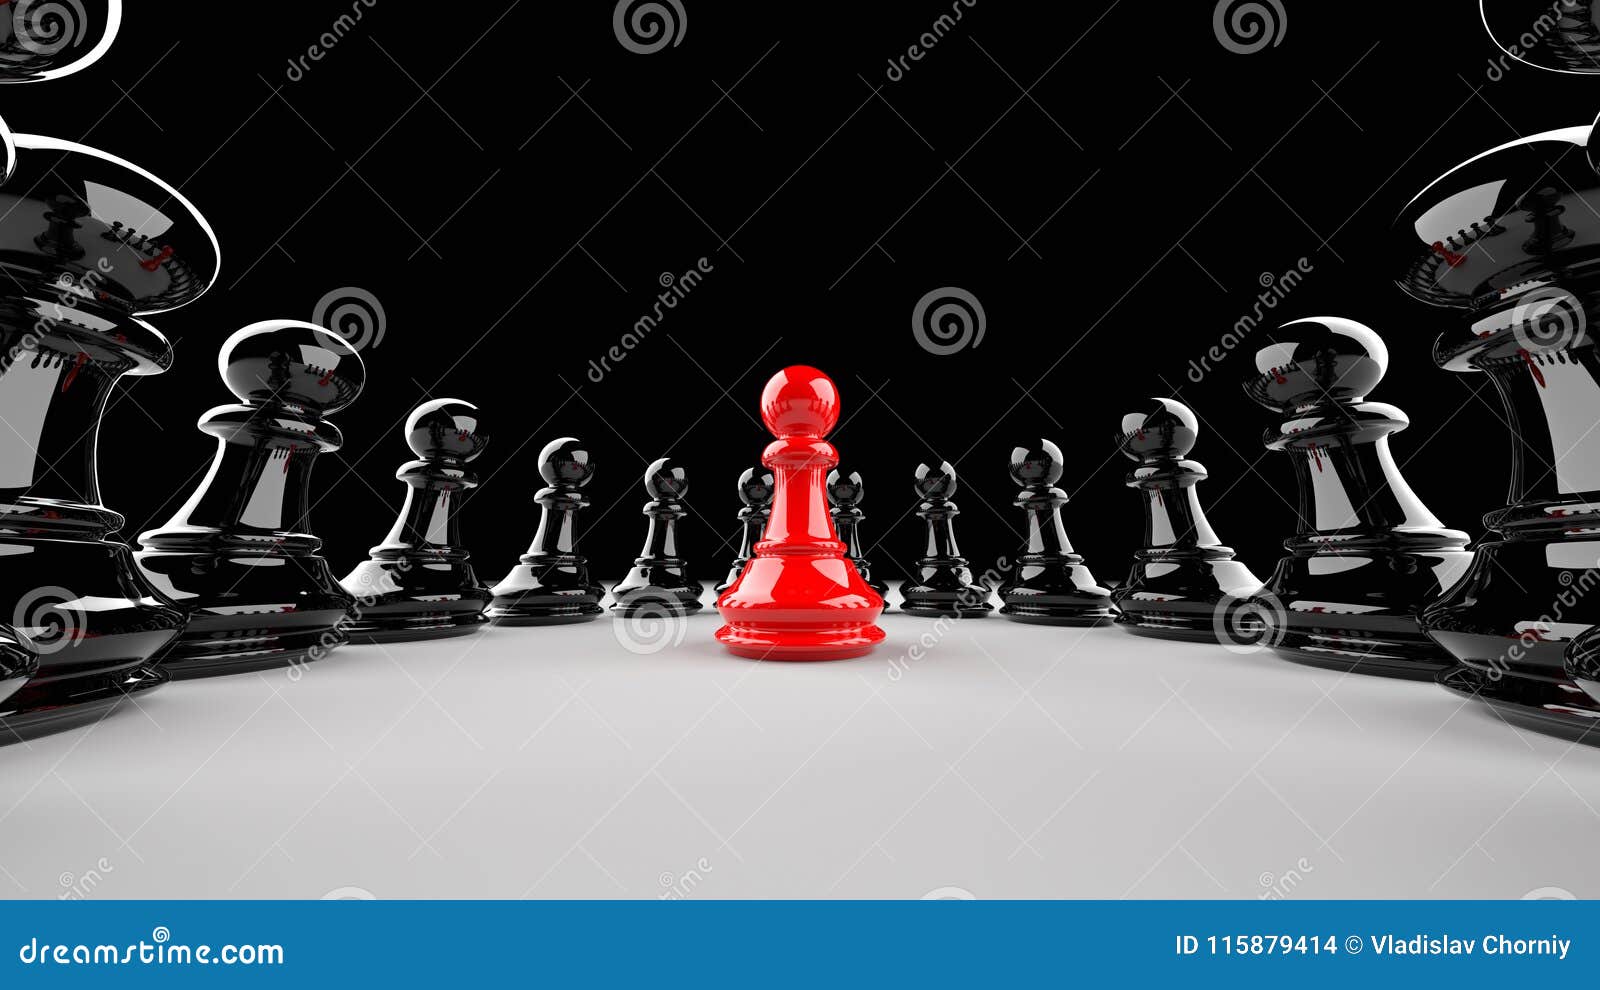 Red pawn of chess stock illustration. Illustration of game - 115879414